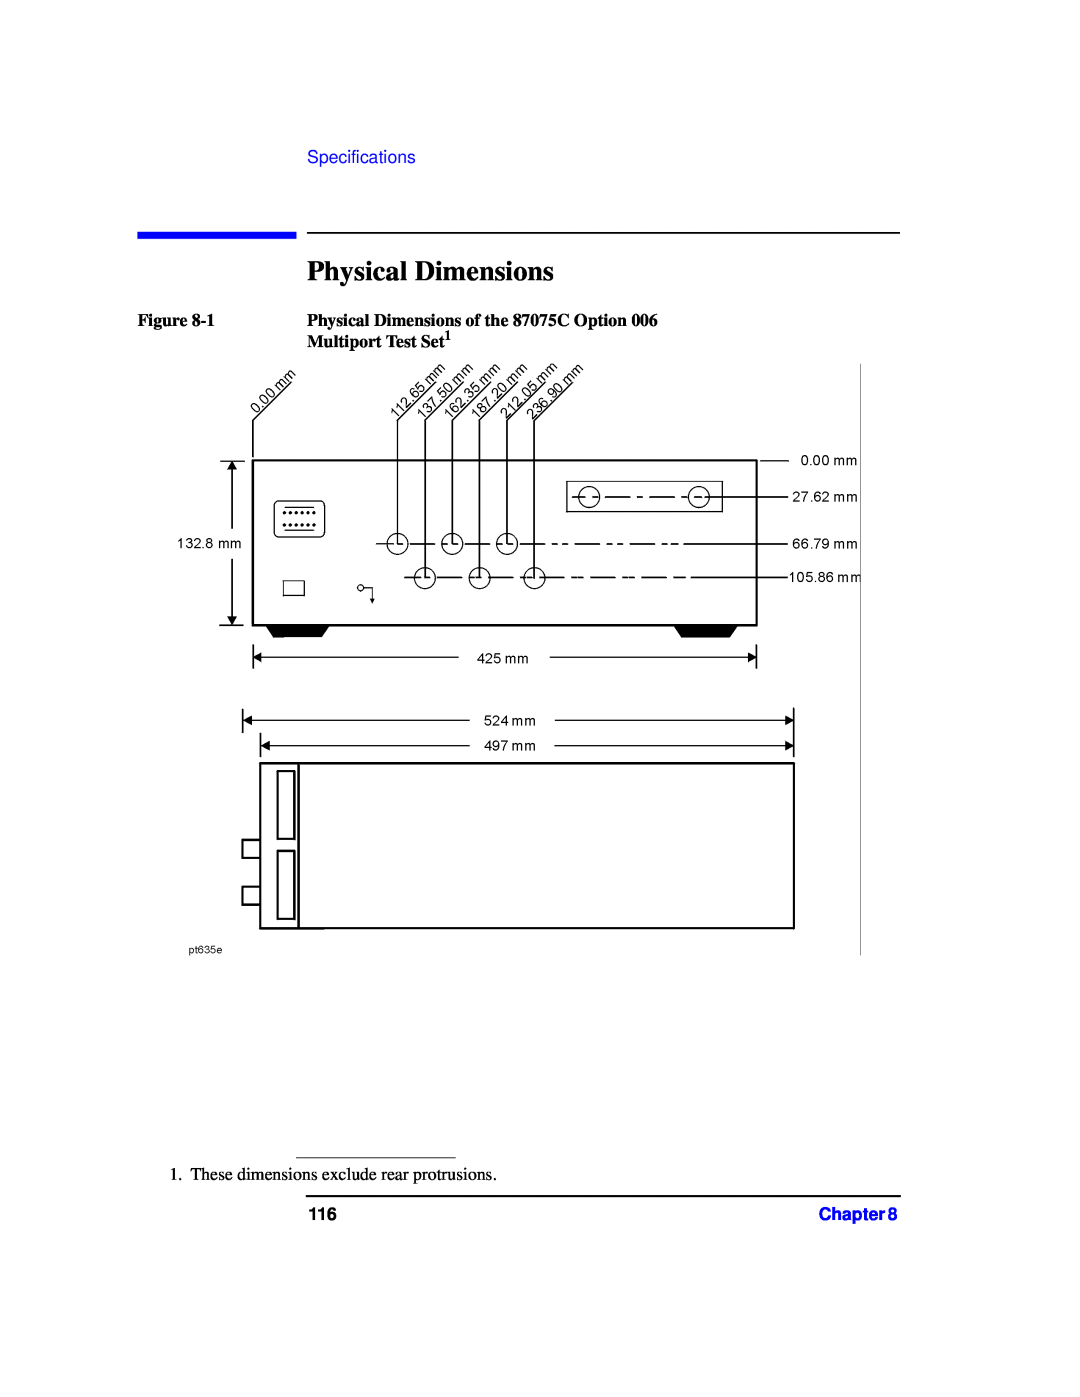 Agilent Technologies manual Specifications, Physical Dimensions of the 87075C Option, Multiport Test Set1, Chapter 